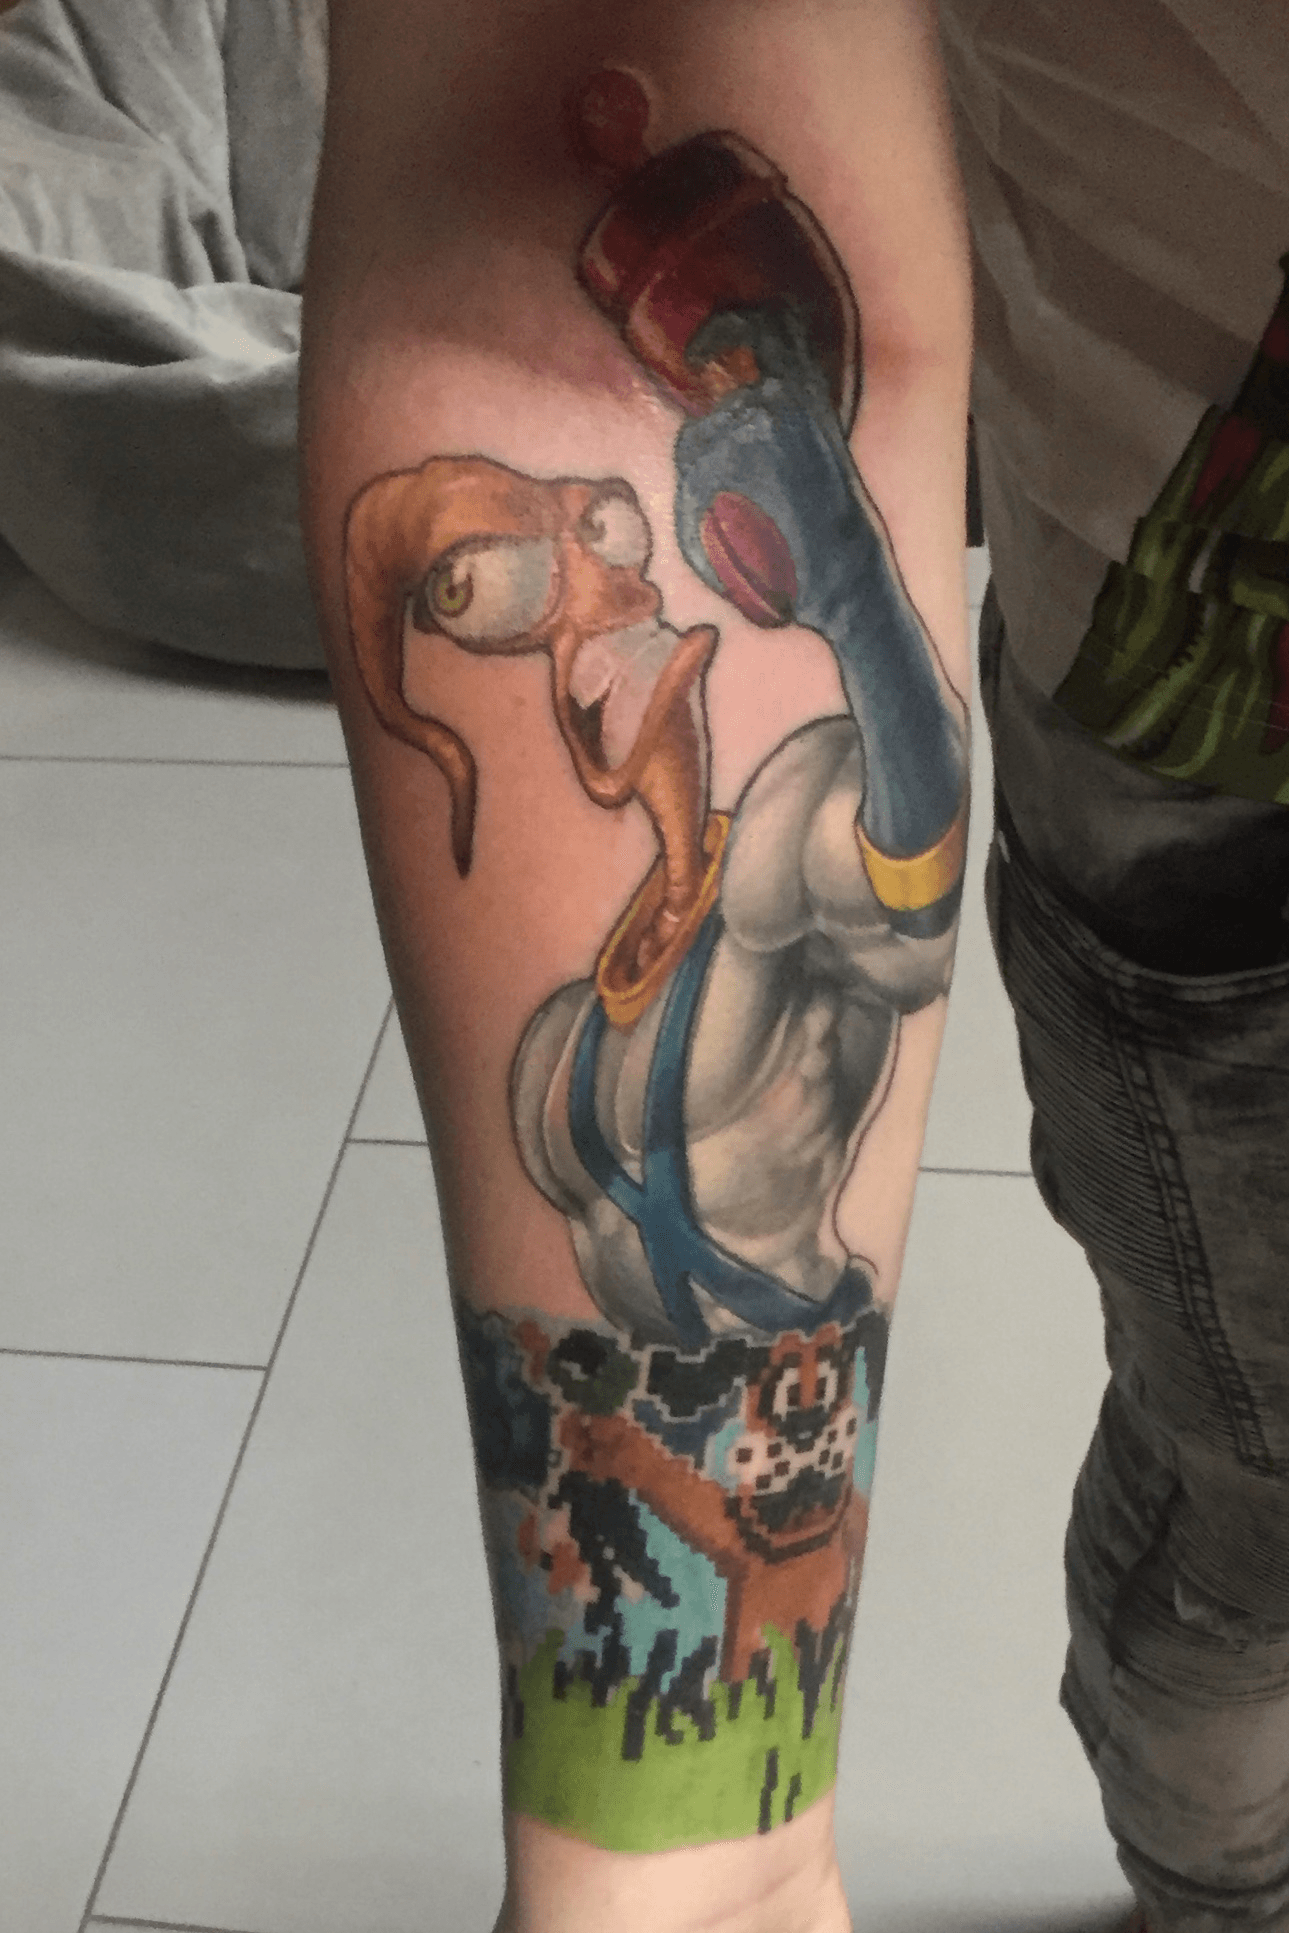 Video Game Tatts  Awesome Earthworm Jim tattoo for todays 2nd  blackworkwednesday post thanks to joesinnertattoos   Facebook